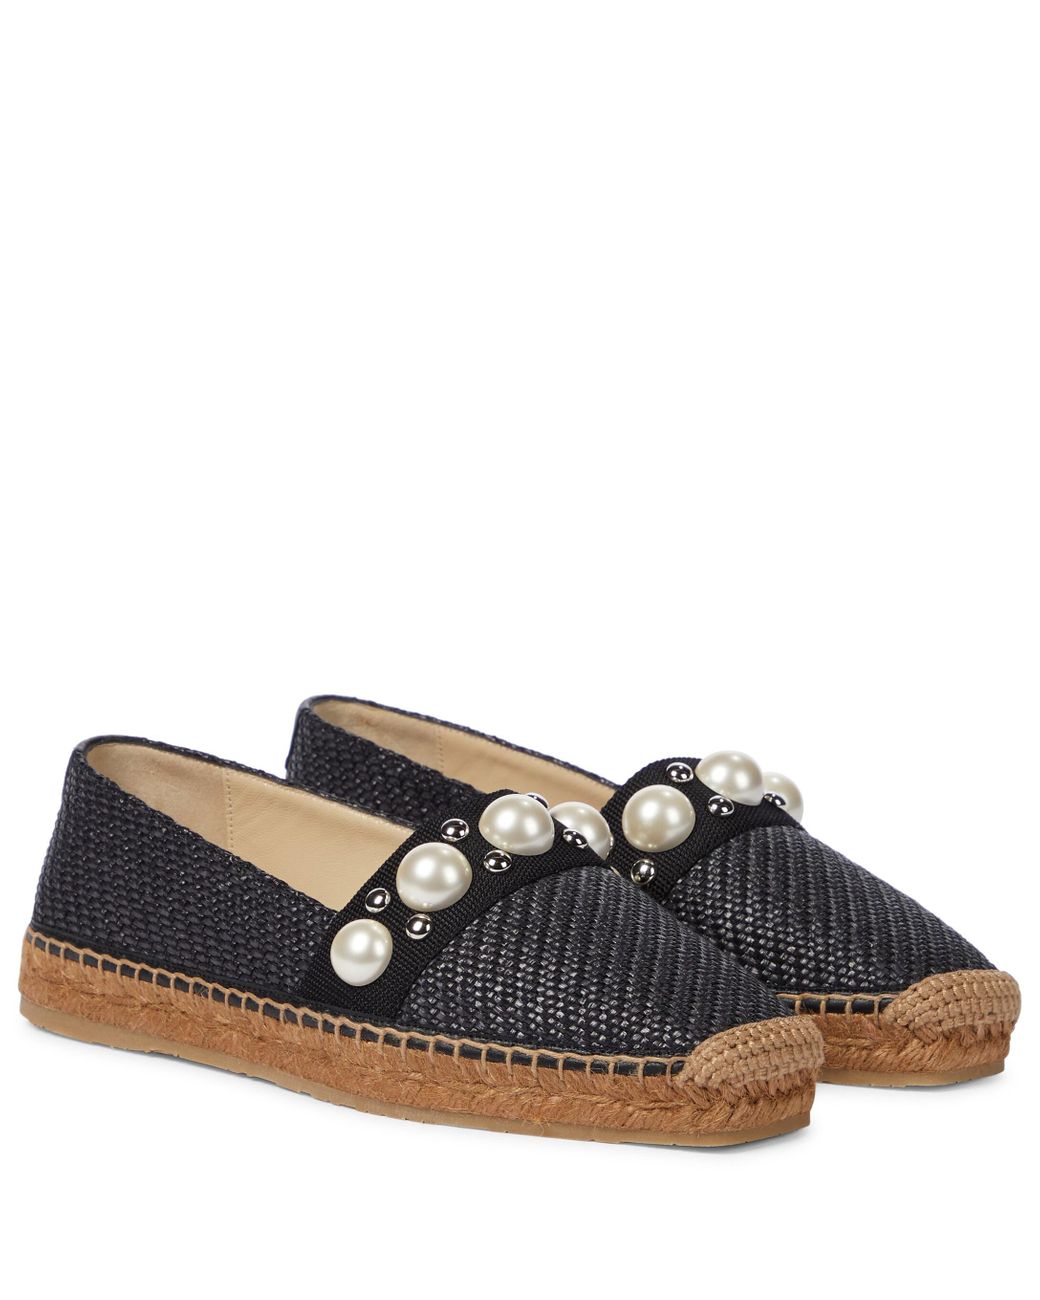 Jimmy Choo Cotton Dru Crystal-embellished Espadrilles in Black Womens Shoes Flats and flat shoes Espadrille shoes and sandals 